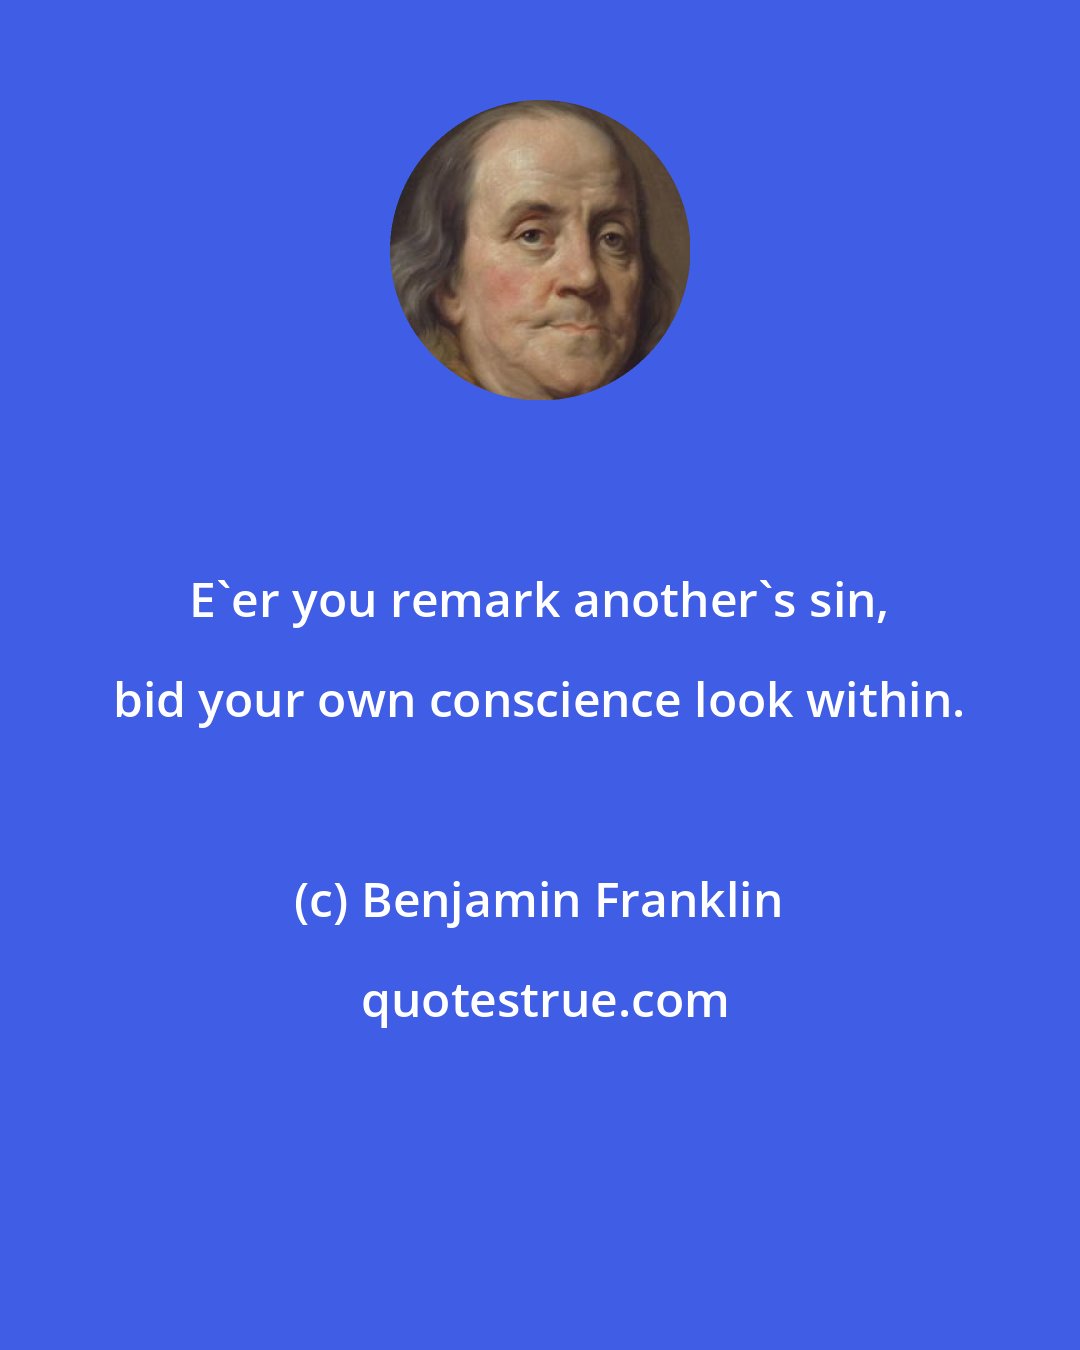 Benjamin Franklin: E'er you remark another's sin, bid your own conscience look within.